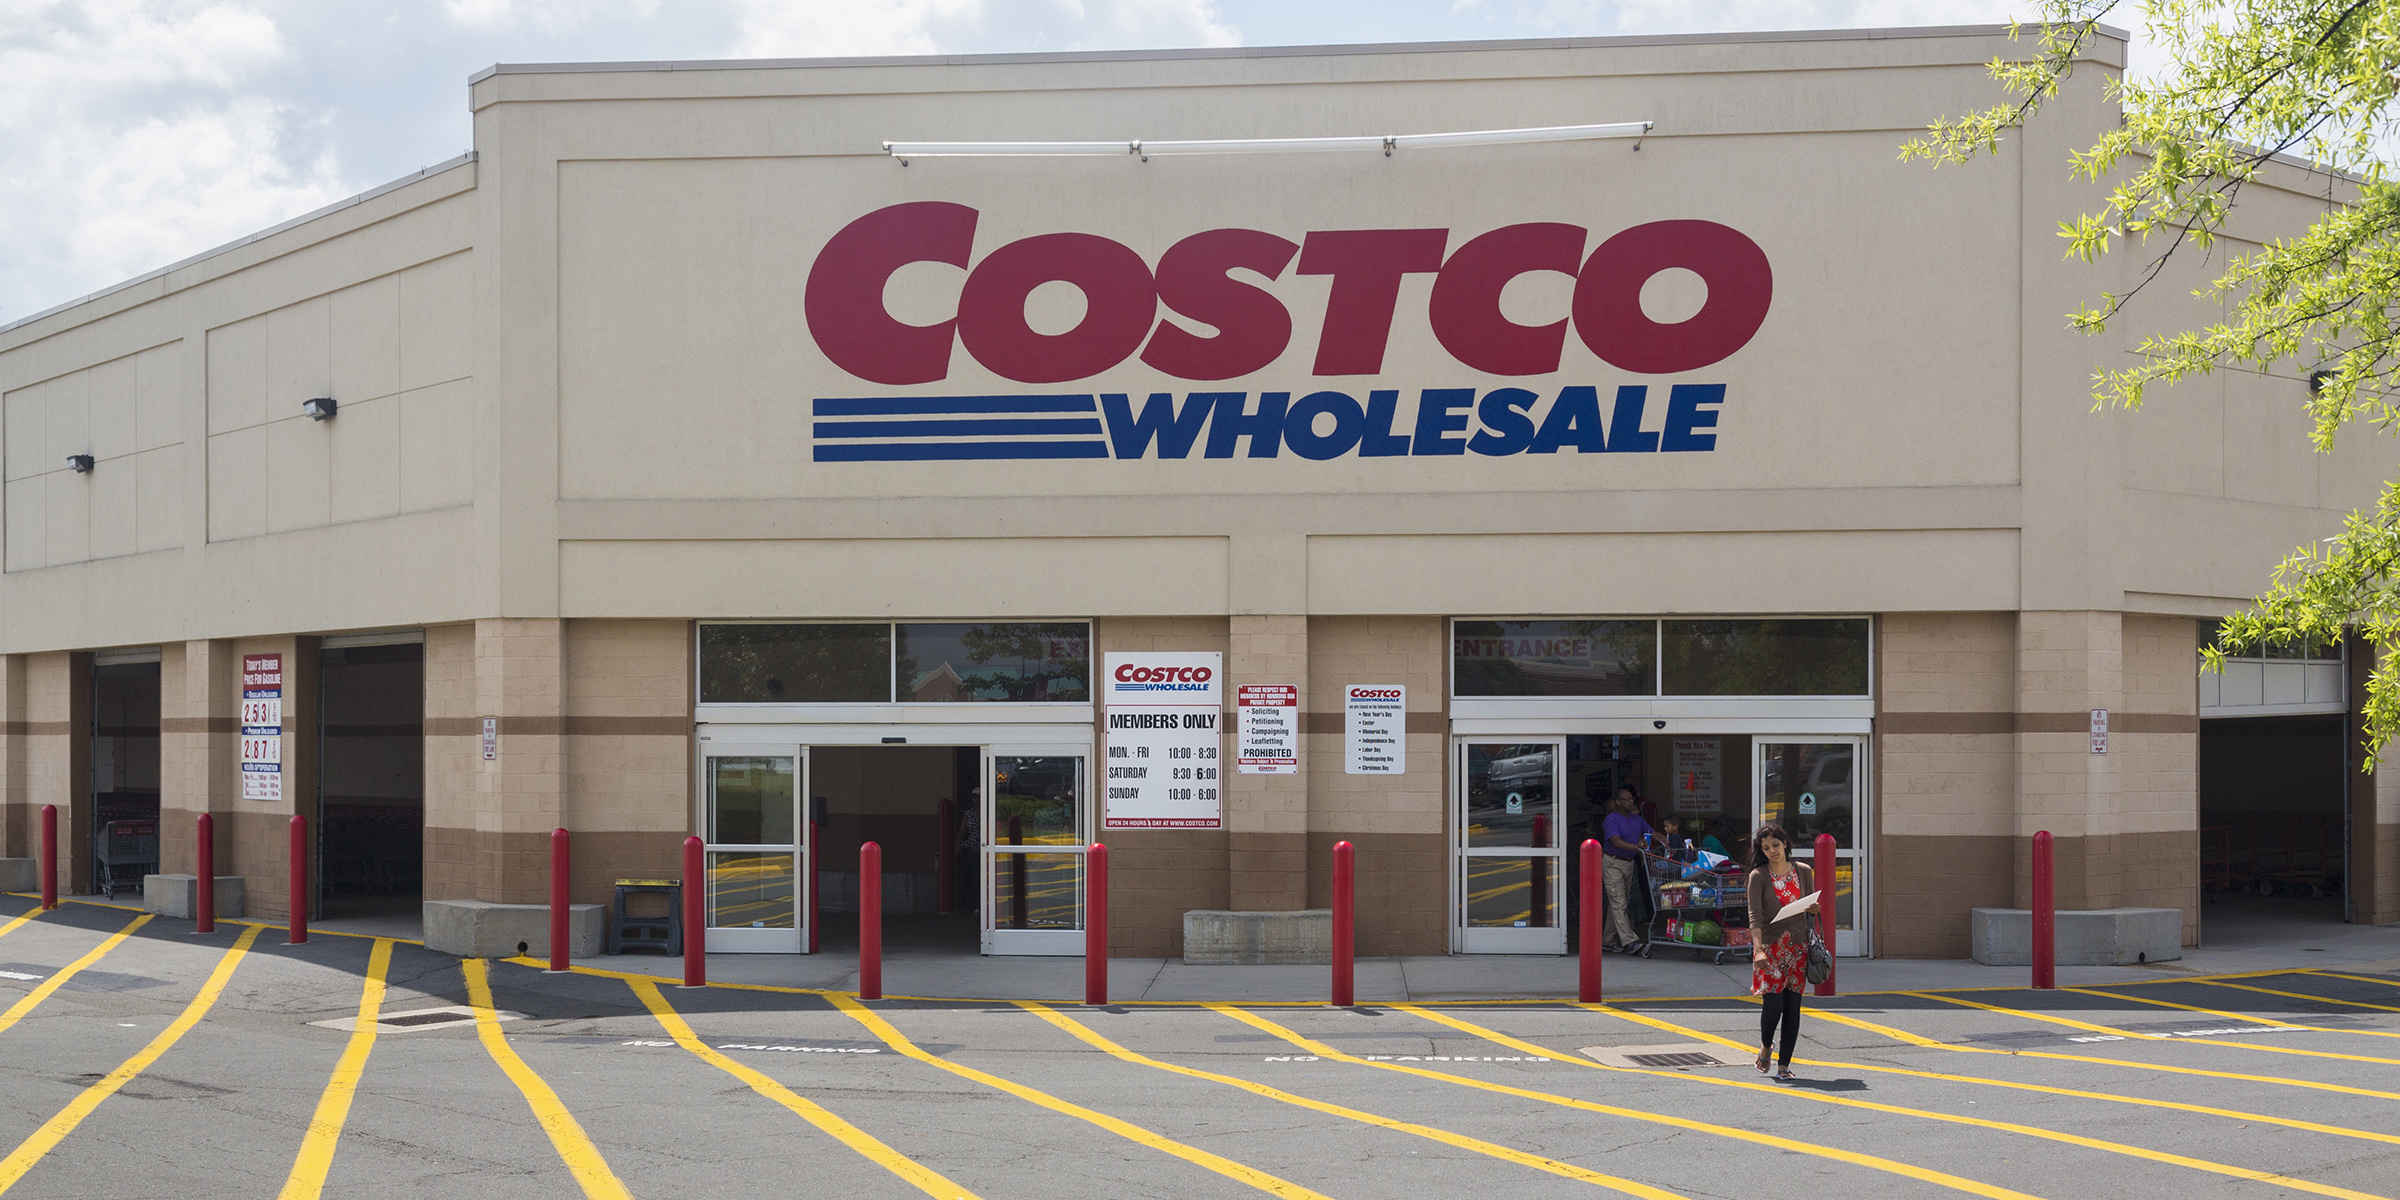 Costco Return Policy â€“ Hereâ€™s What You Must Know - Bare Foots World